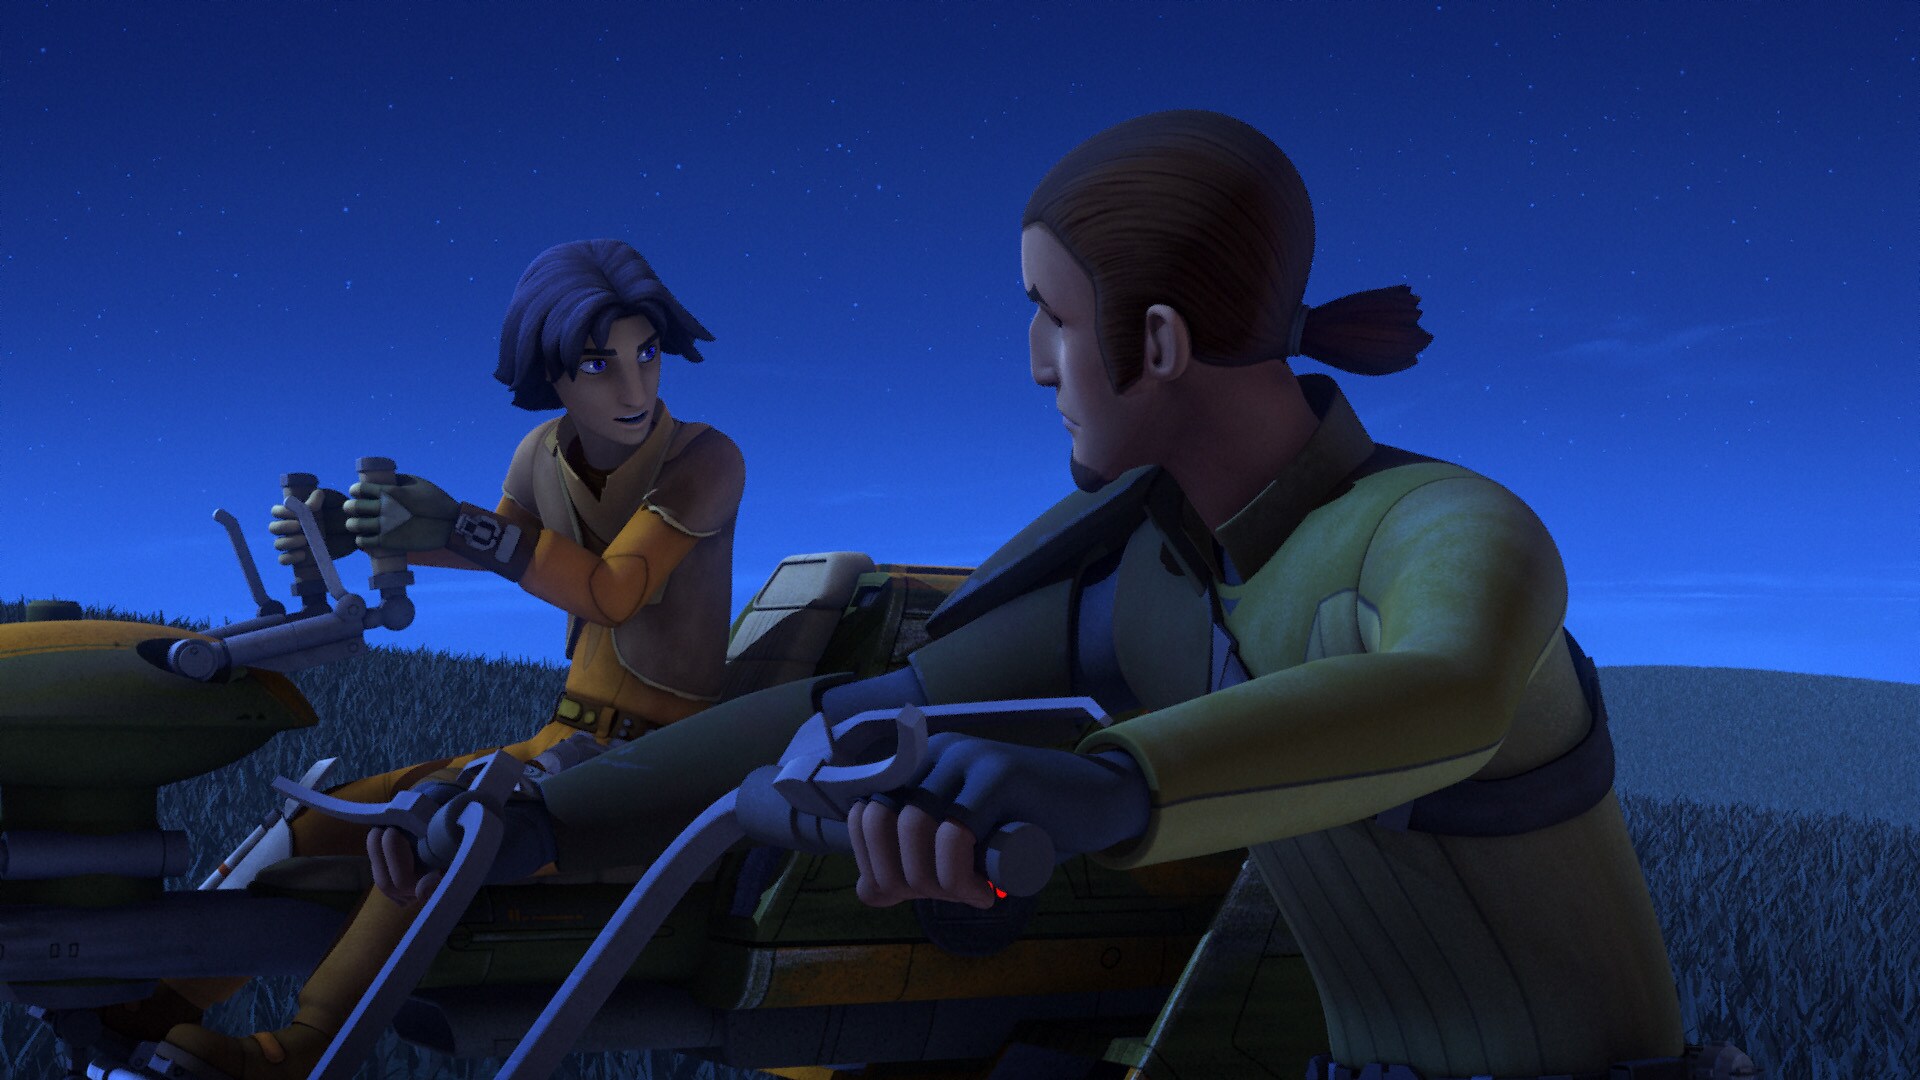 Meanwhile, Ezra, Kanan, and Sabine find themselves in a speeder bike chase with local Imperials. 